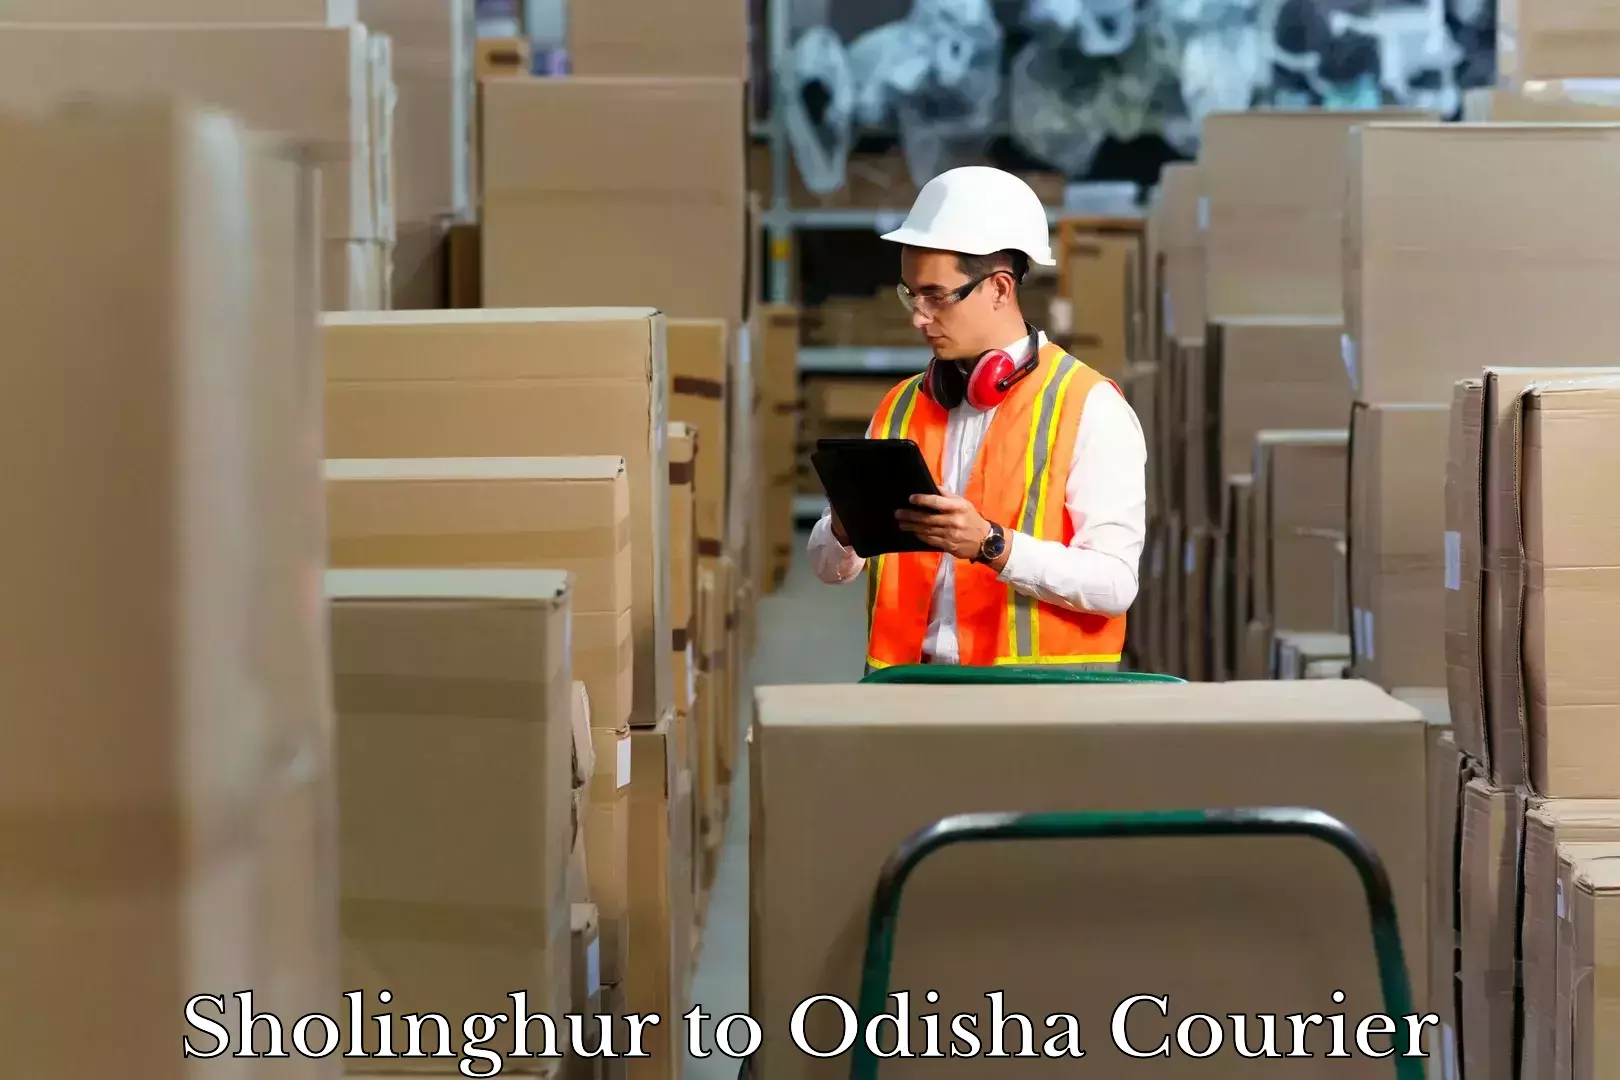 Instant baggage transport quote in Sholinghur to Bhubaneswar